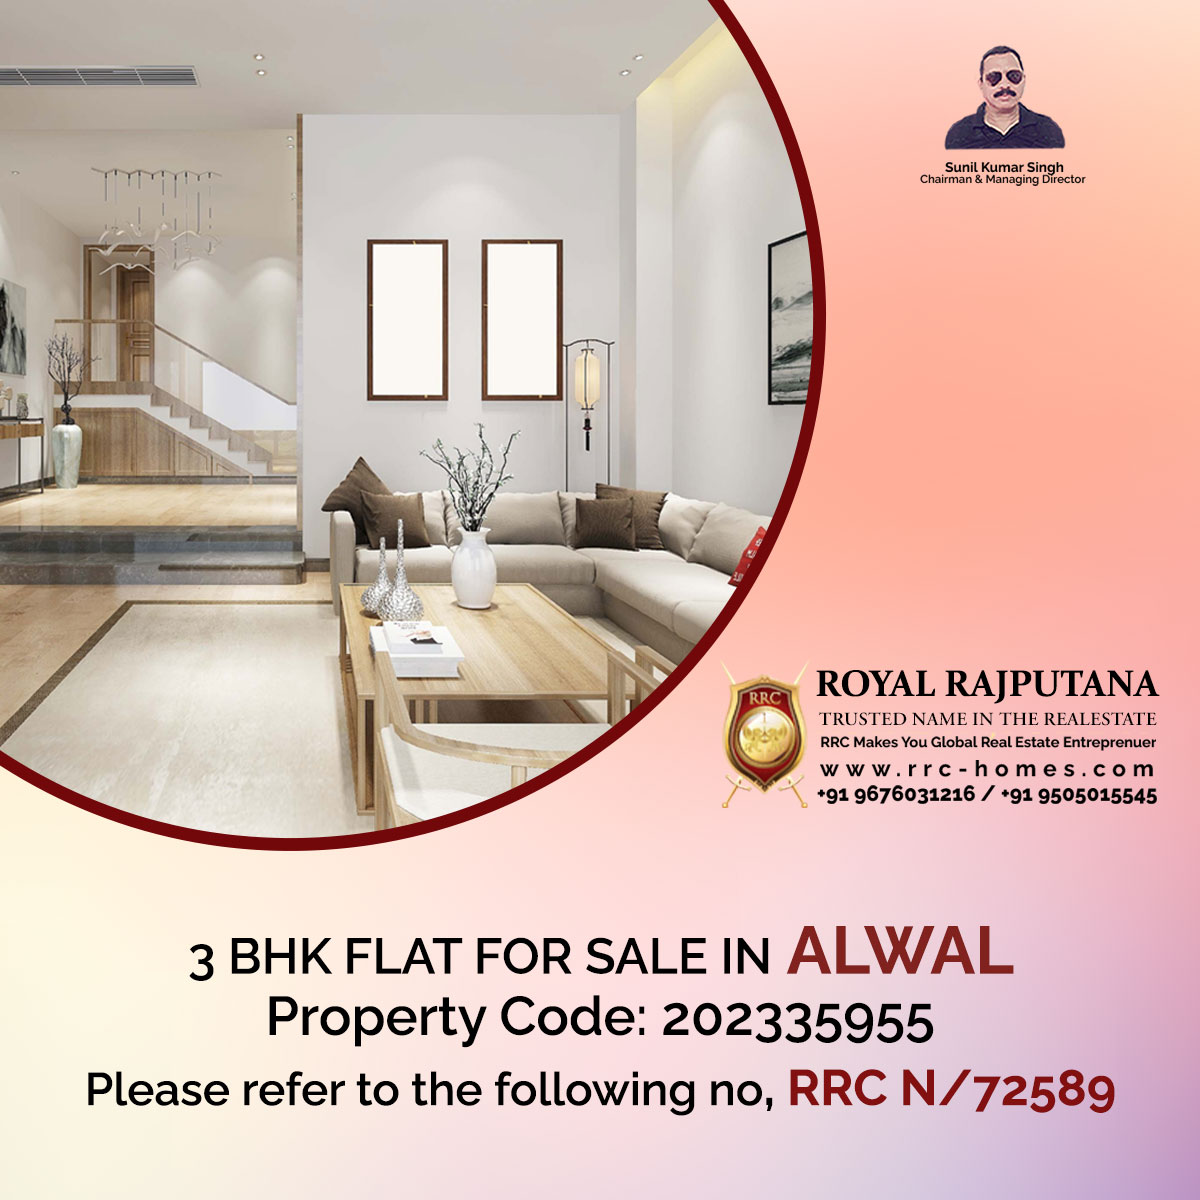 3 BHK FLAT FOR SALE IN ALWAL
Property Code: 202335955
Please refer to the following no, RRC N/72589 

#royalrajputana #royalrajputanahomes #rrc #rrchomes #sale #lease #rent #propertyservices #properties #aboutrrc #3BHK #flat #alwal #propertycode